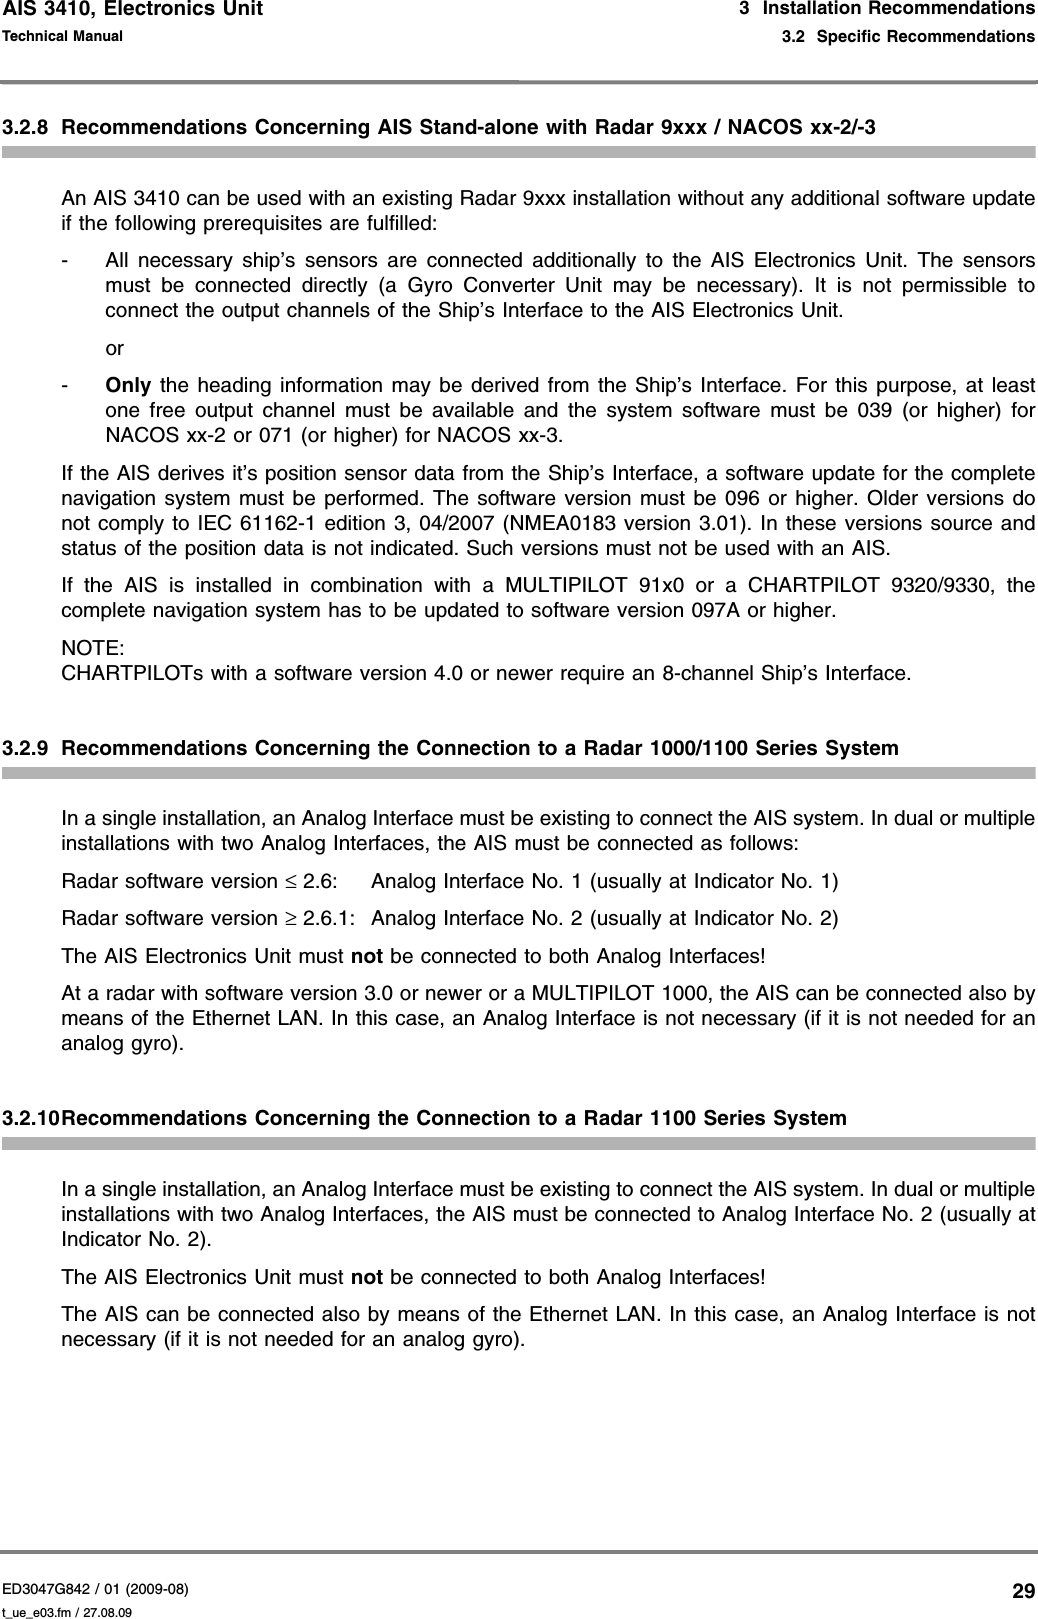 AIS 3410, Electronics UnitED3047G842 / 01 (2009-08)Technical Manual3  Installation Recommendations3.2  Specific Recommendationst_ue_e03.fm / 27.08.09293.2.8 Recommendations Concerning AIS Stand-alone with Radar 9xxx / NACOS xx-2/-3An AIS 3410 can be used with an existing Radar 9xxx installation without any additional software update if the following prerequisites are fulfilled:- All necessary ship’s sensors are connected additionally to the AIS Electronics Unit. The sensors must be connected directly (a Gyro Converter Unit may be necessary). It is not permissible to connect the output channels of the Ship’s Interface to the AIS Electronics Unit.or-Only the heading information may be derived from the Ship’s Interface. For this purpose, at least one free output channel must be available and the system software must be 039 (or higher) for NACOS xx-2 or 071 (or higher) for NACOS xx-3.If the AIS derives it’s position sensor data from the Ship’s Interface, a software update for the complete navigation system must be performed. The software version must be 096 or higher. Older versions do not comply to IEC 61162-1 edition 3, 04/2007 (NMEA0183 version 3.01). In these versions source and status of the position data is not indicated. Such versions must not be used with an AIS.If the AIS is installed in combination with a MULTIPILOT 91x0 or a CHARTPILOT 9320/9330, the complete navigation system has to be updated to software version 097A or higher.NOTE:CHARTPILOTs with a software version 4.0 or newer require an 8-channel Ship’s Interface.3.2.9 Recommendations Concerning the Connection to a Radar 1000/1100 Series SystemIn a single installation, an Analog Interface must be existing to connect the AIS system. In dual or multiple installations with two Analog Interfaces, the AIS must be connected as follows:Radar software version ≤ 2.6: Analog Interface No. 1 (usually at Indicator No. 1)Radar software version ≥ 2.6.1: Analog Interface No. 2 (usually at Indicator No. 2)The AIS Electronics Unit must not be connected to both Analog Interfaces!At a radar with software version 3.0 or newer or a MULTIPILOT 1000, the AIS can be connected also by means of the Ethernet LAN. In this case, an Analog Interface is not necessary (if it is not needed for an analog gyro).3.2.10Recommendations Concerning the Connection to a Radar 1100 Series SystemIn a single installation, an Analog Interface must be existing to connect the AIS system. In dual or multiple installations with two Analog Interfaces, the AIS must be connected to Analog Interface No. 2 (usually at Indicator No. 2).The AIS Electronics Unit must not be connected to both Analog Interfaces!The AIS can be connected also by means of the Ethernet LAN. In this case, an Analog Interface is not necessary (if it is not needed for an analog gyro).